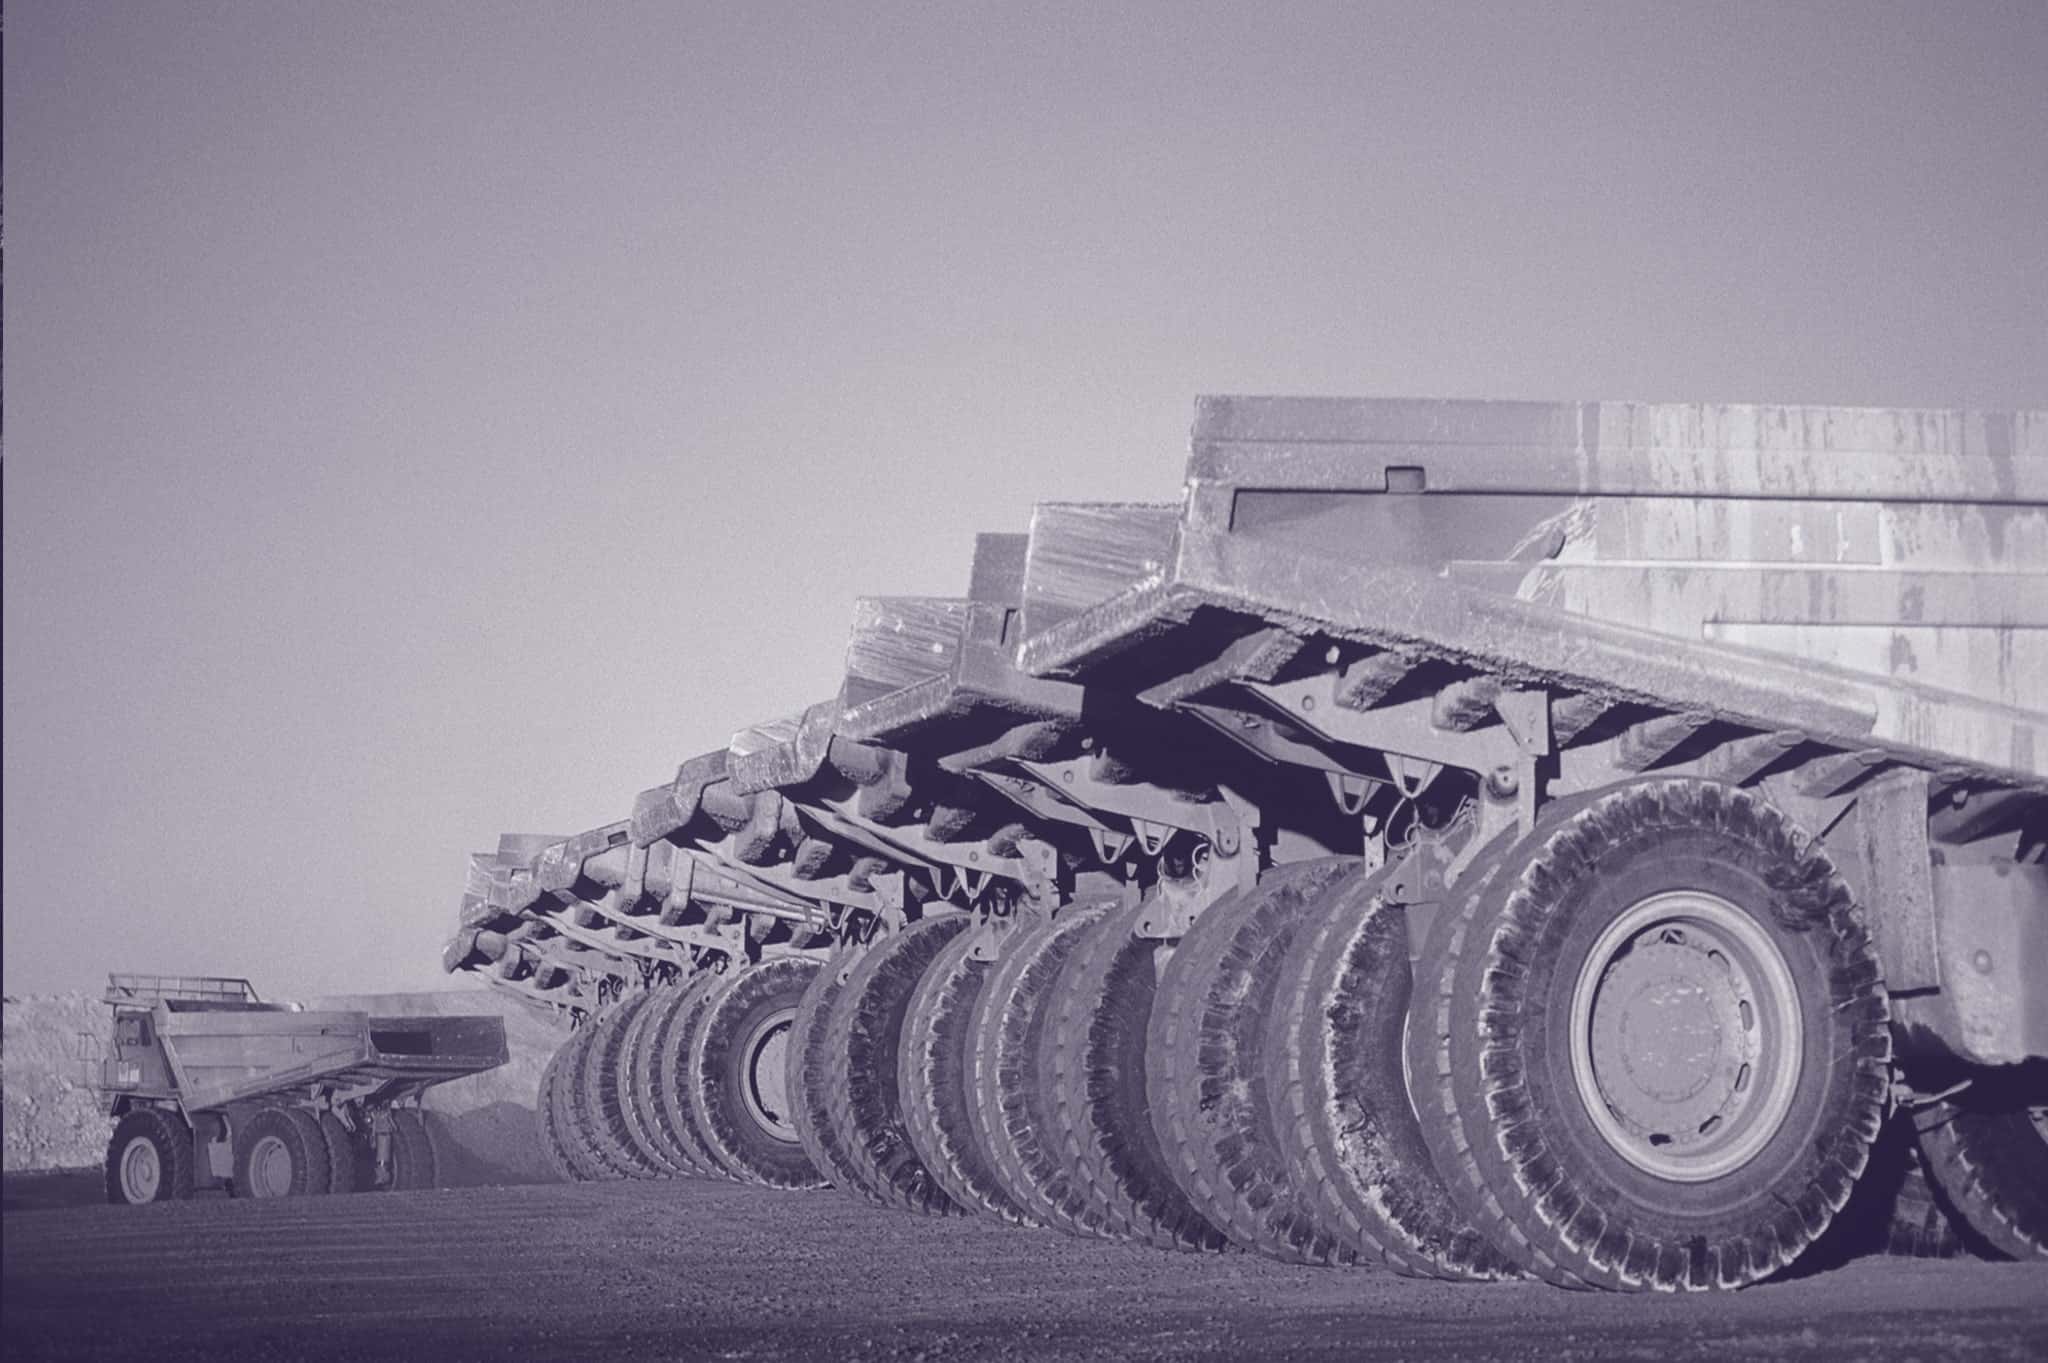 mining trucks lined up in a row